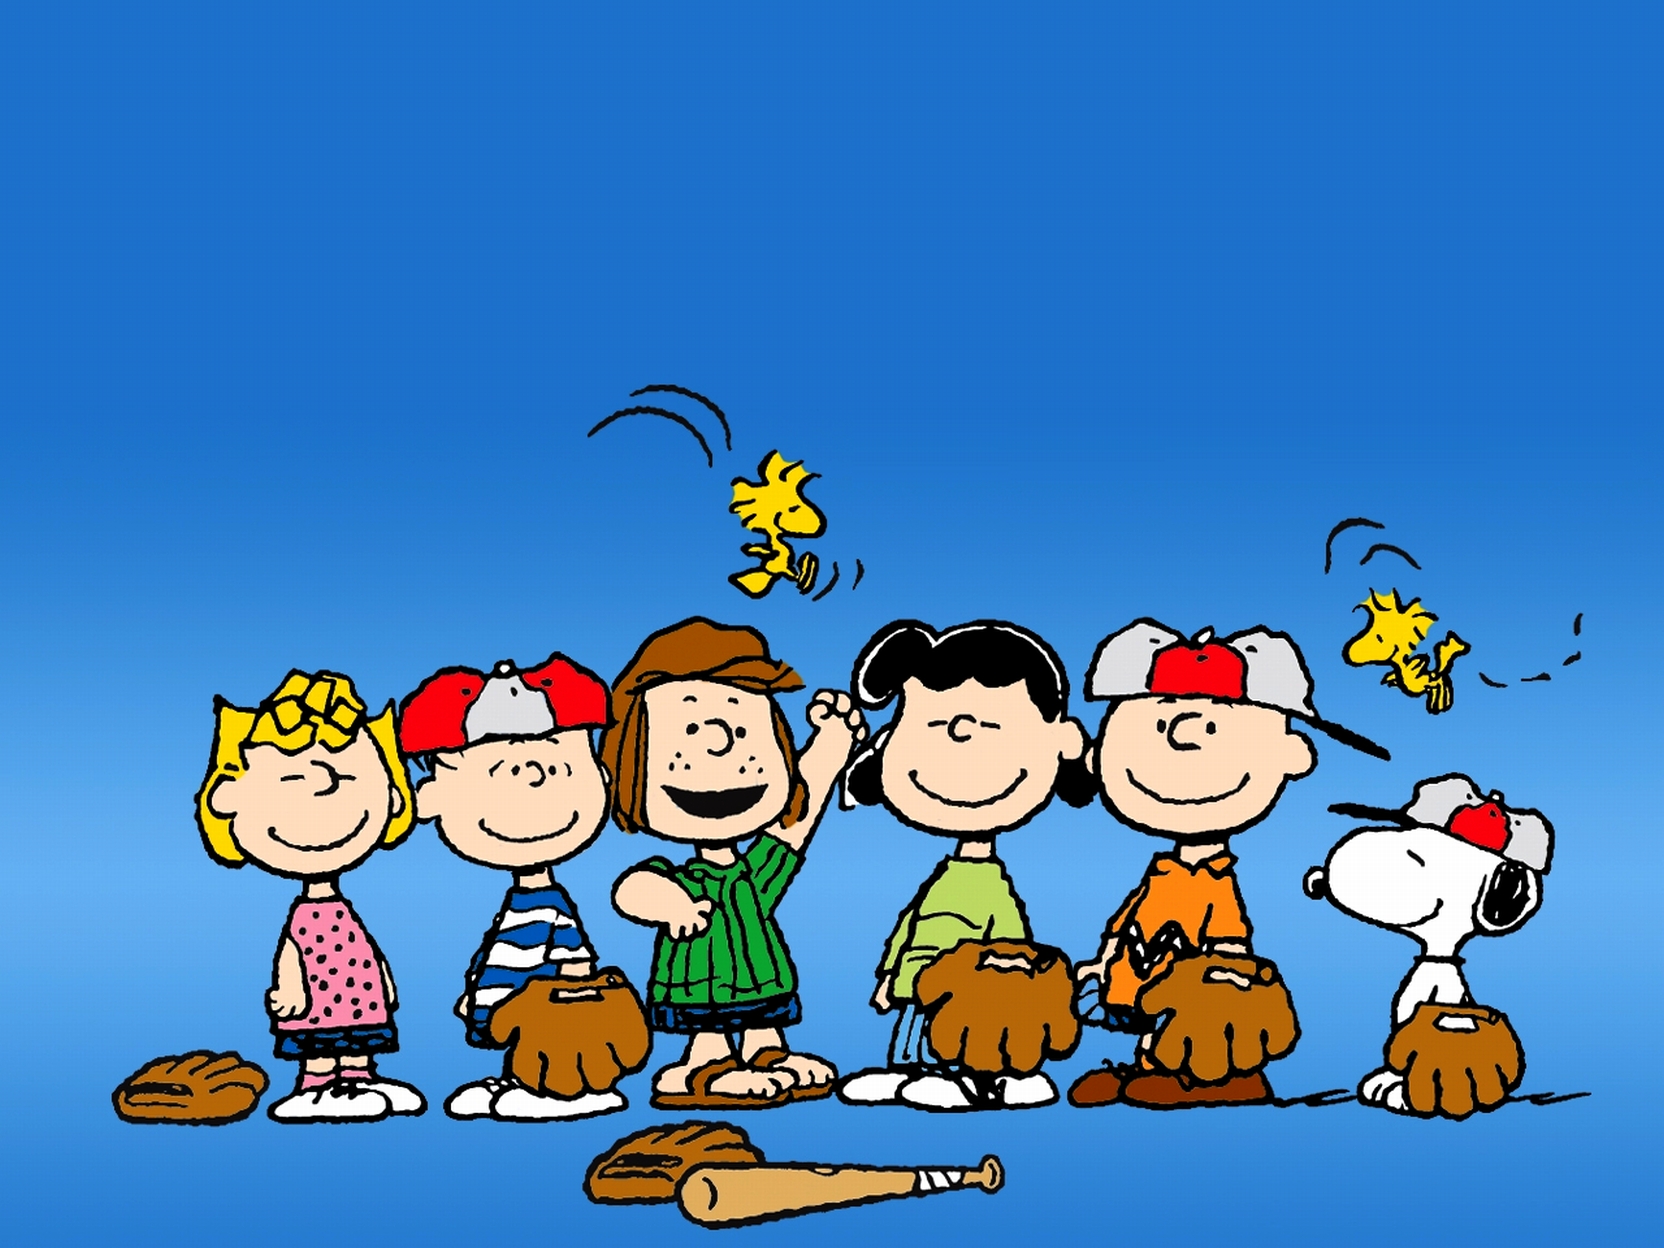 Charlie Brown and the Peanuts gang are ready to play baseball. - Charlie Brown